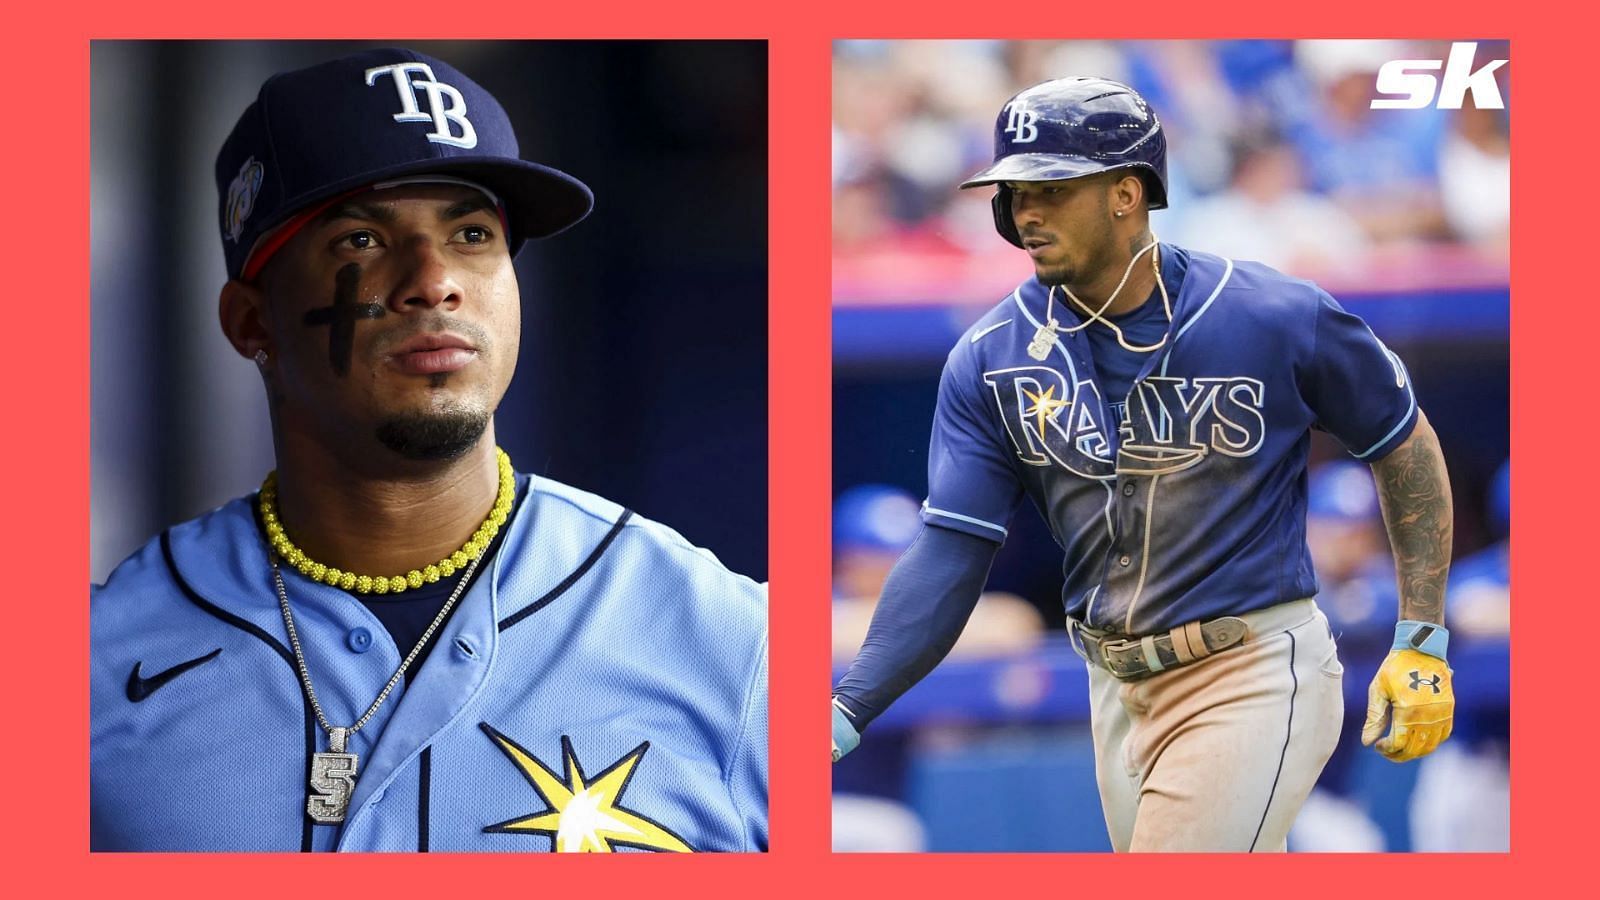 Tampa Bay Rays fans react to Wander Franco being benched as team seeks an attitude adjustment from young star